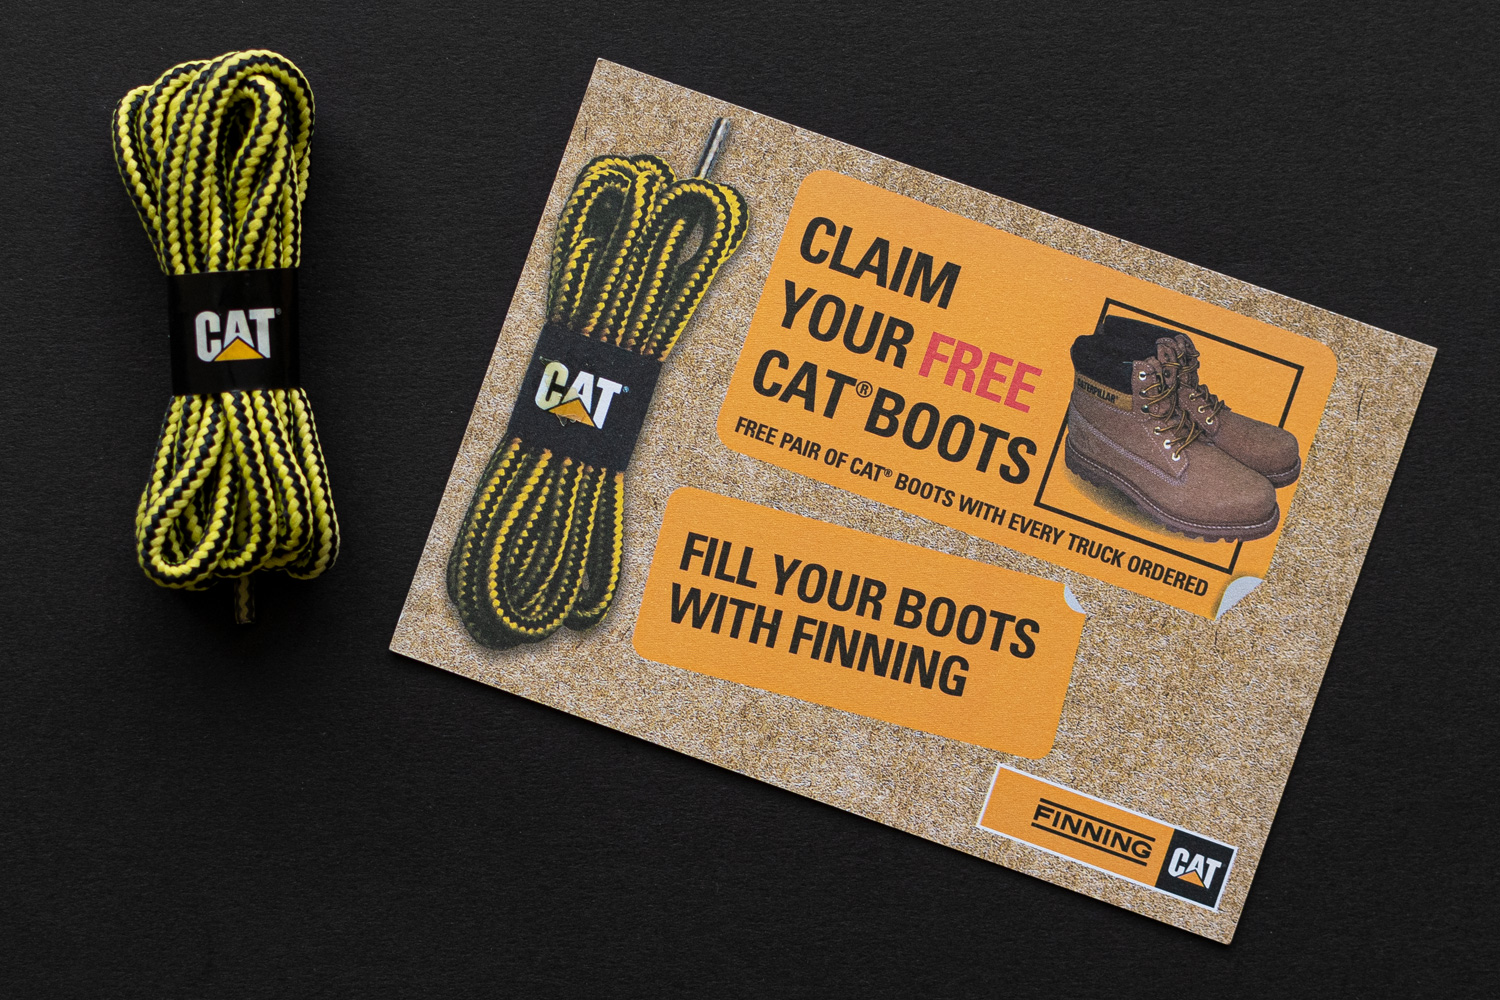 Free CAT boots postcard data collection